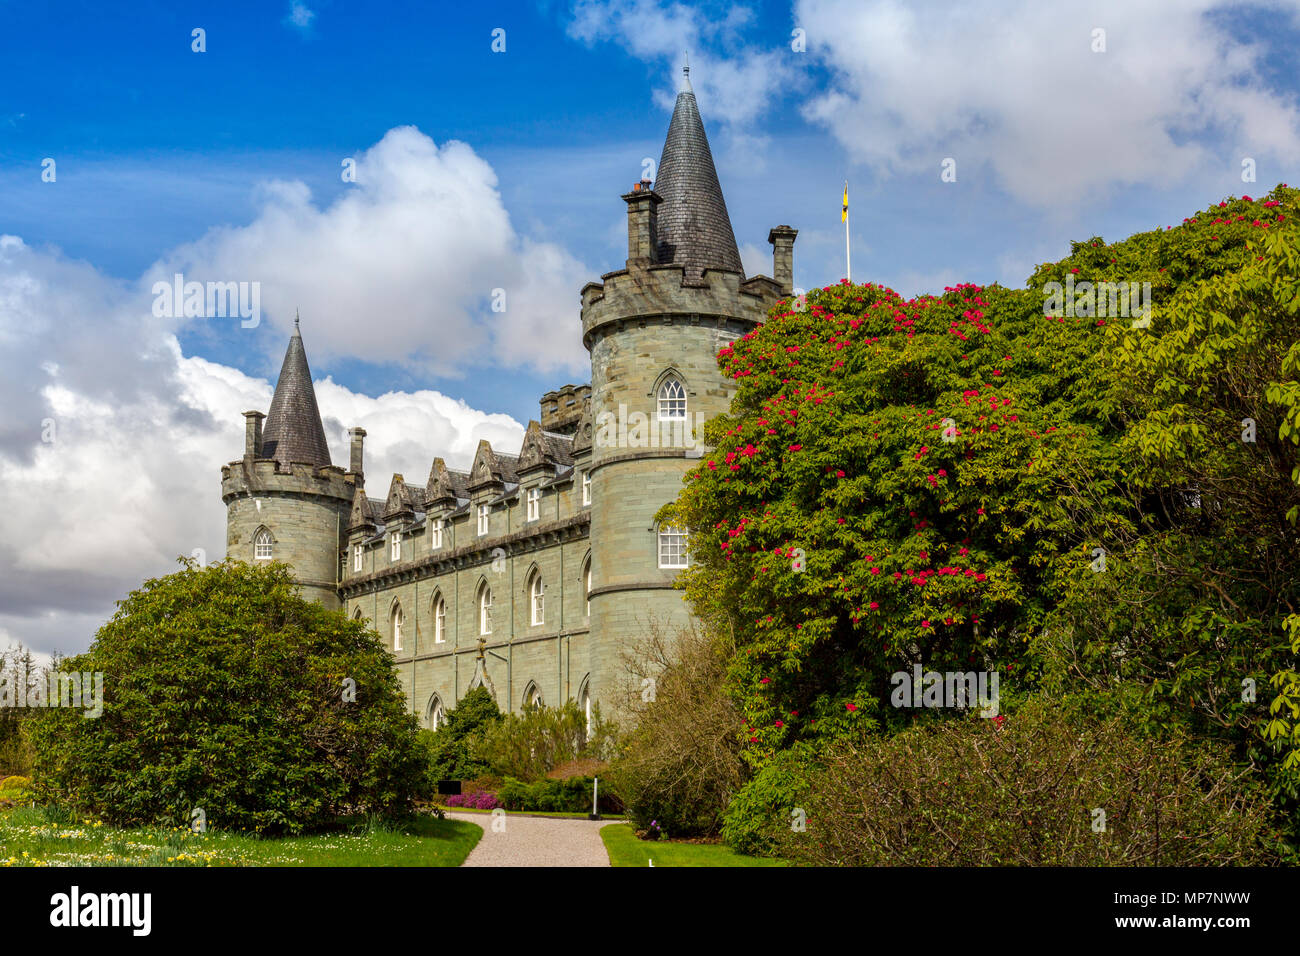 The historic turreted Inveraray Castle from 1789, seat of the Clan Campbell, stands on the shores of Loch Fyne, Argyll & Bute, Scotland, UK Stock Photo